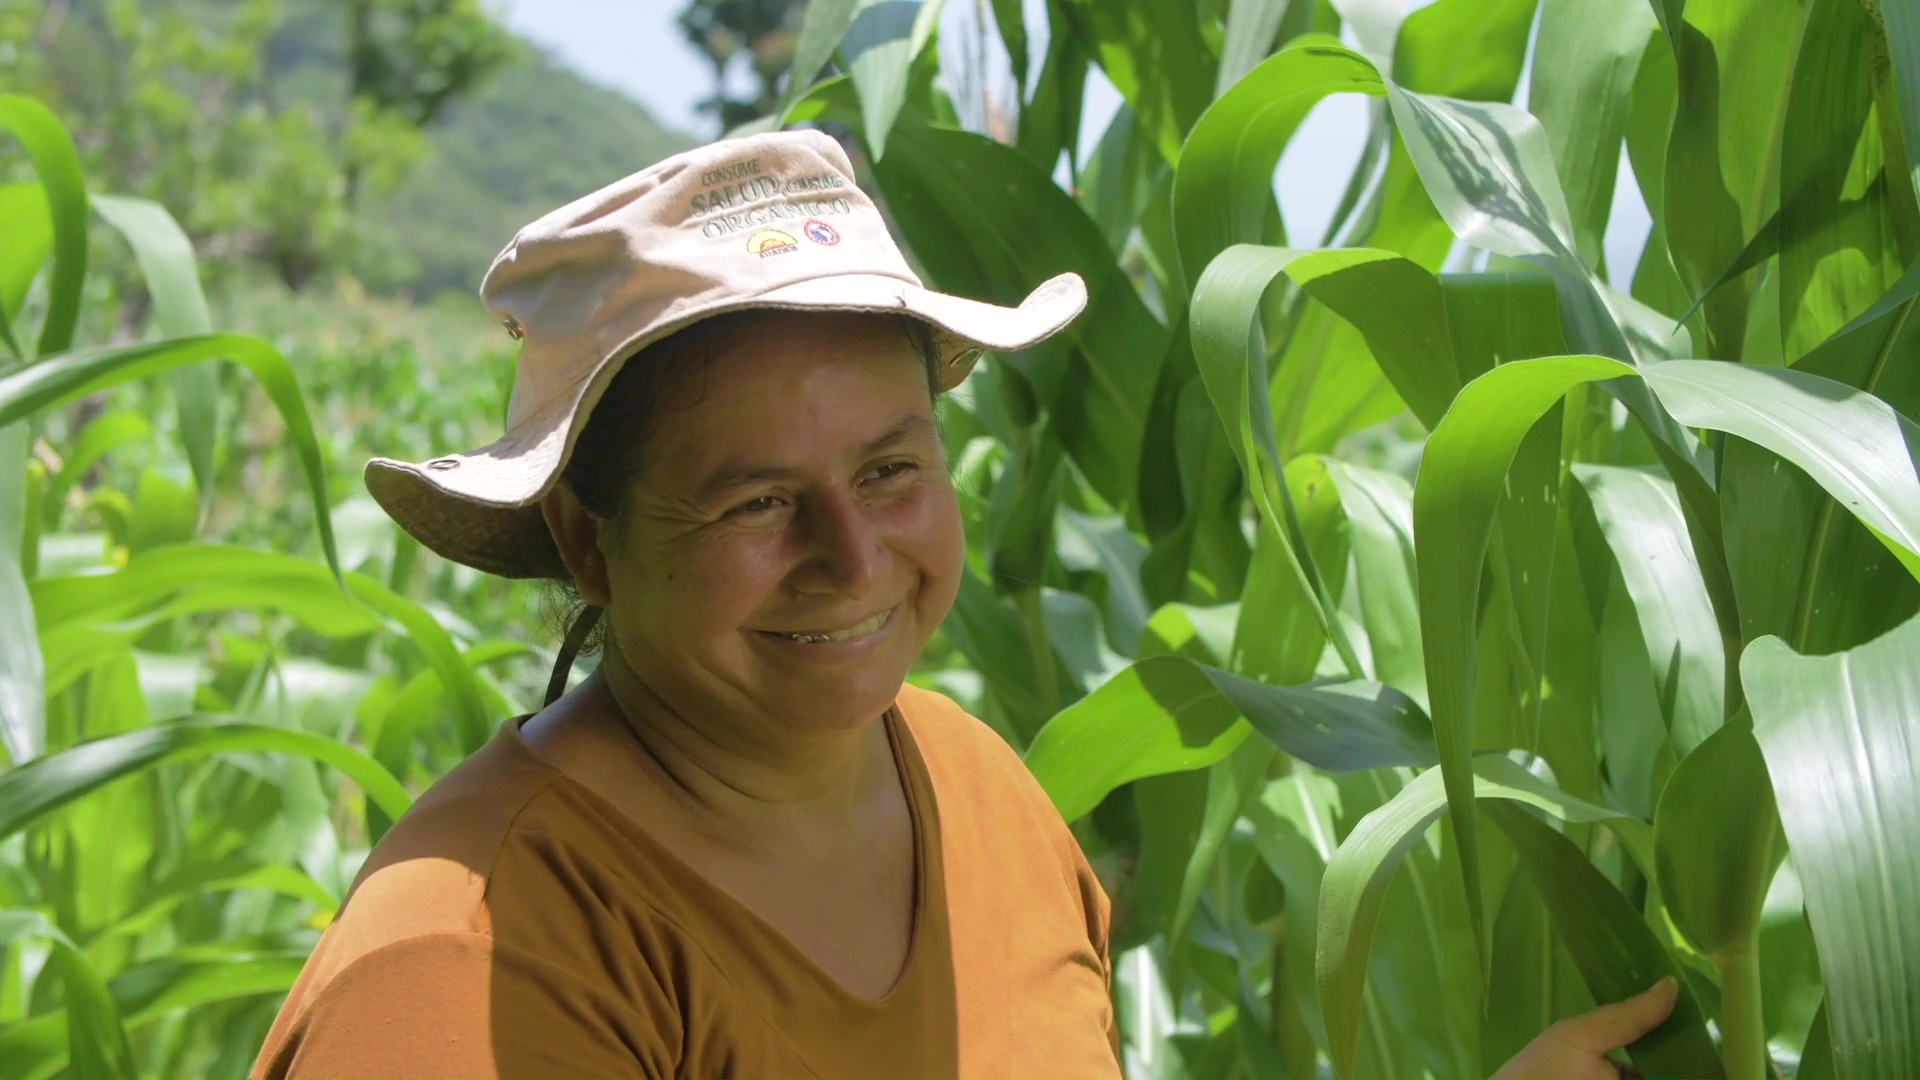 Smiling woman standing in a farm